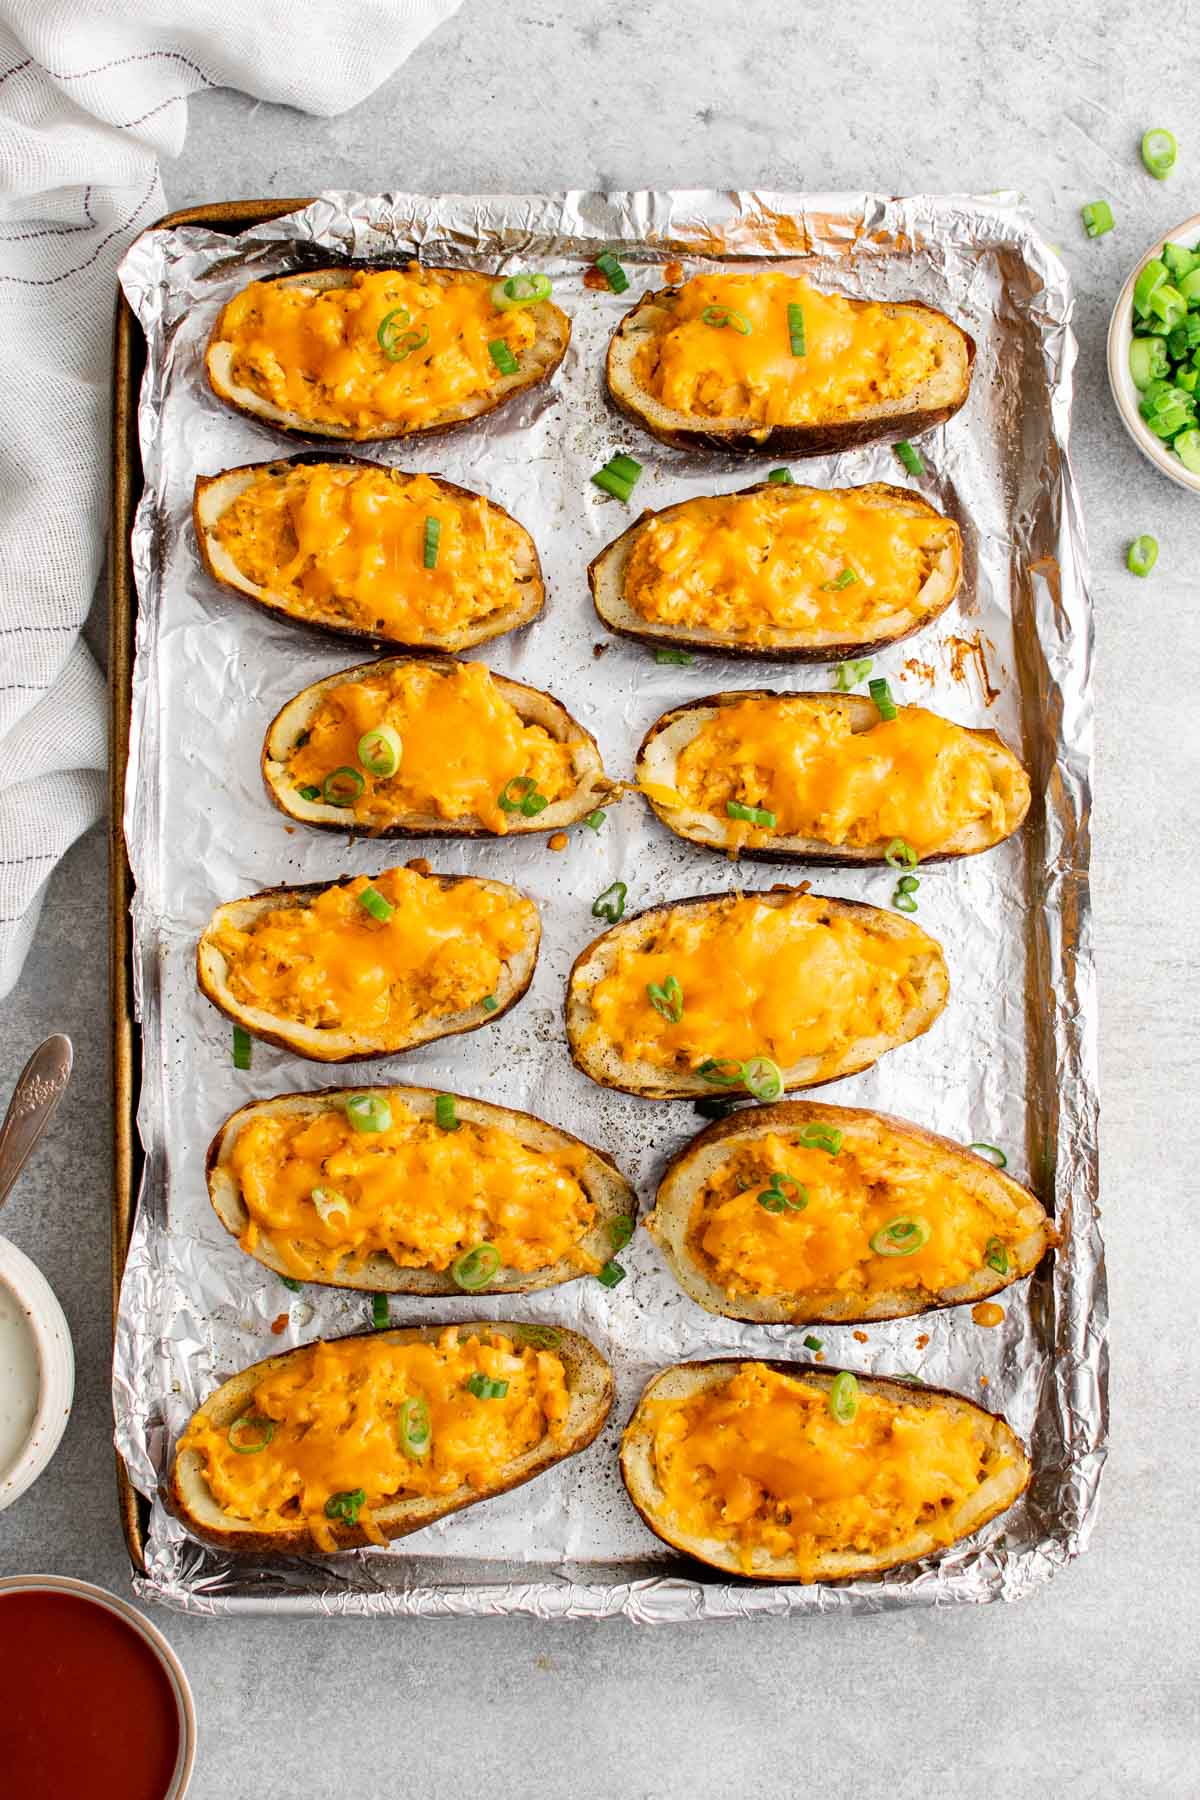 baking sheet covered with foil, baked potato skins with buffalo chicken